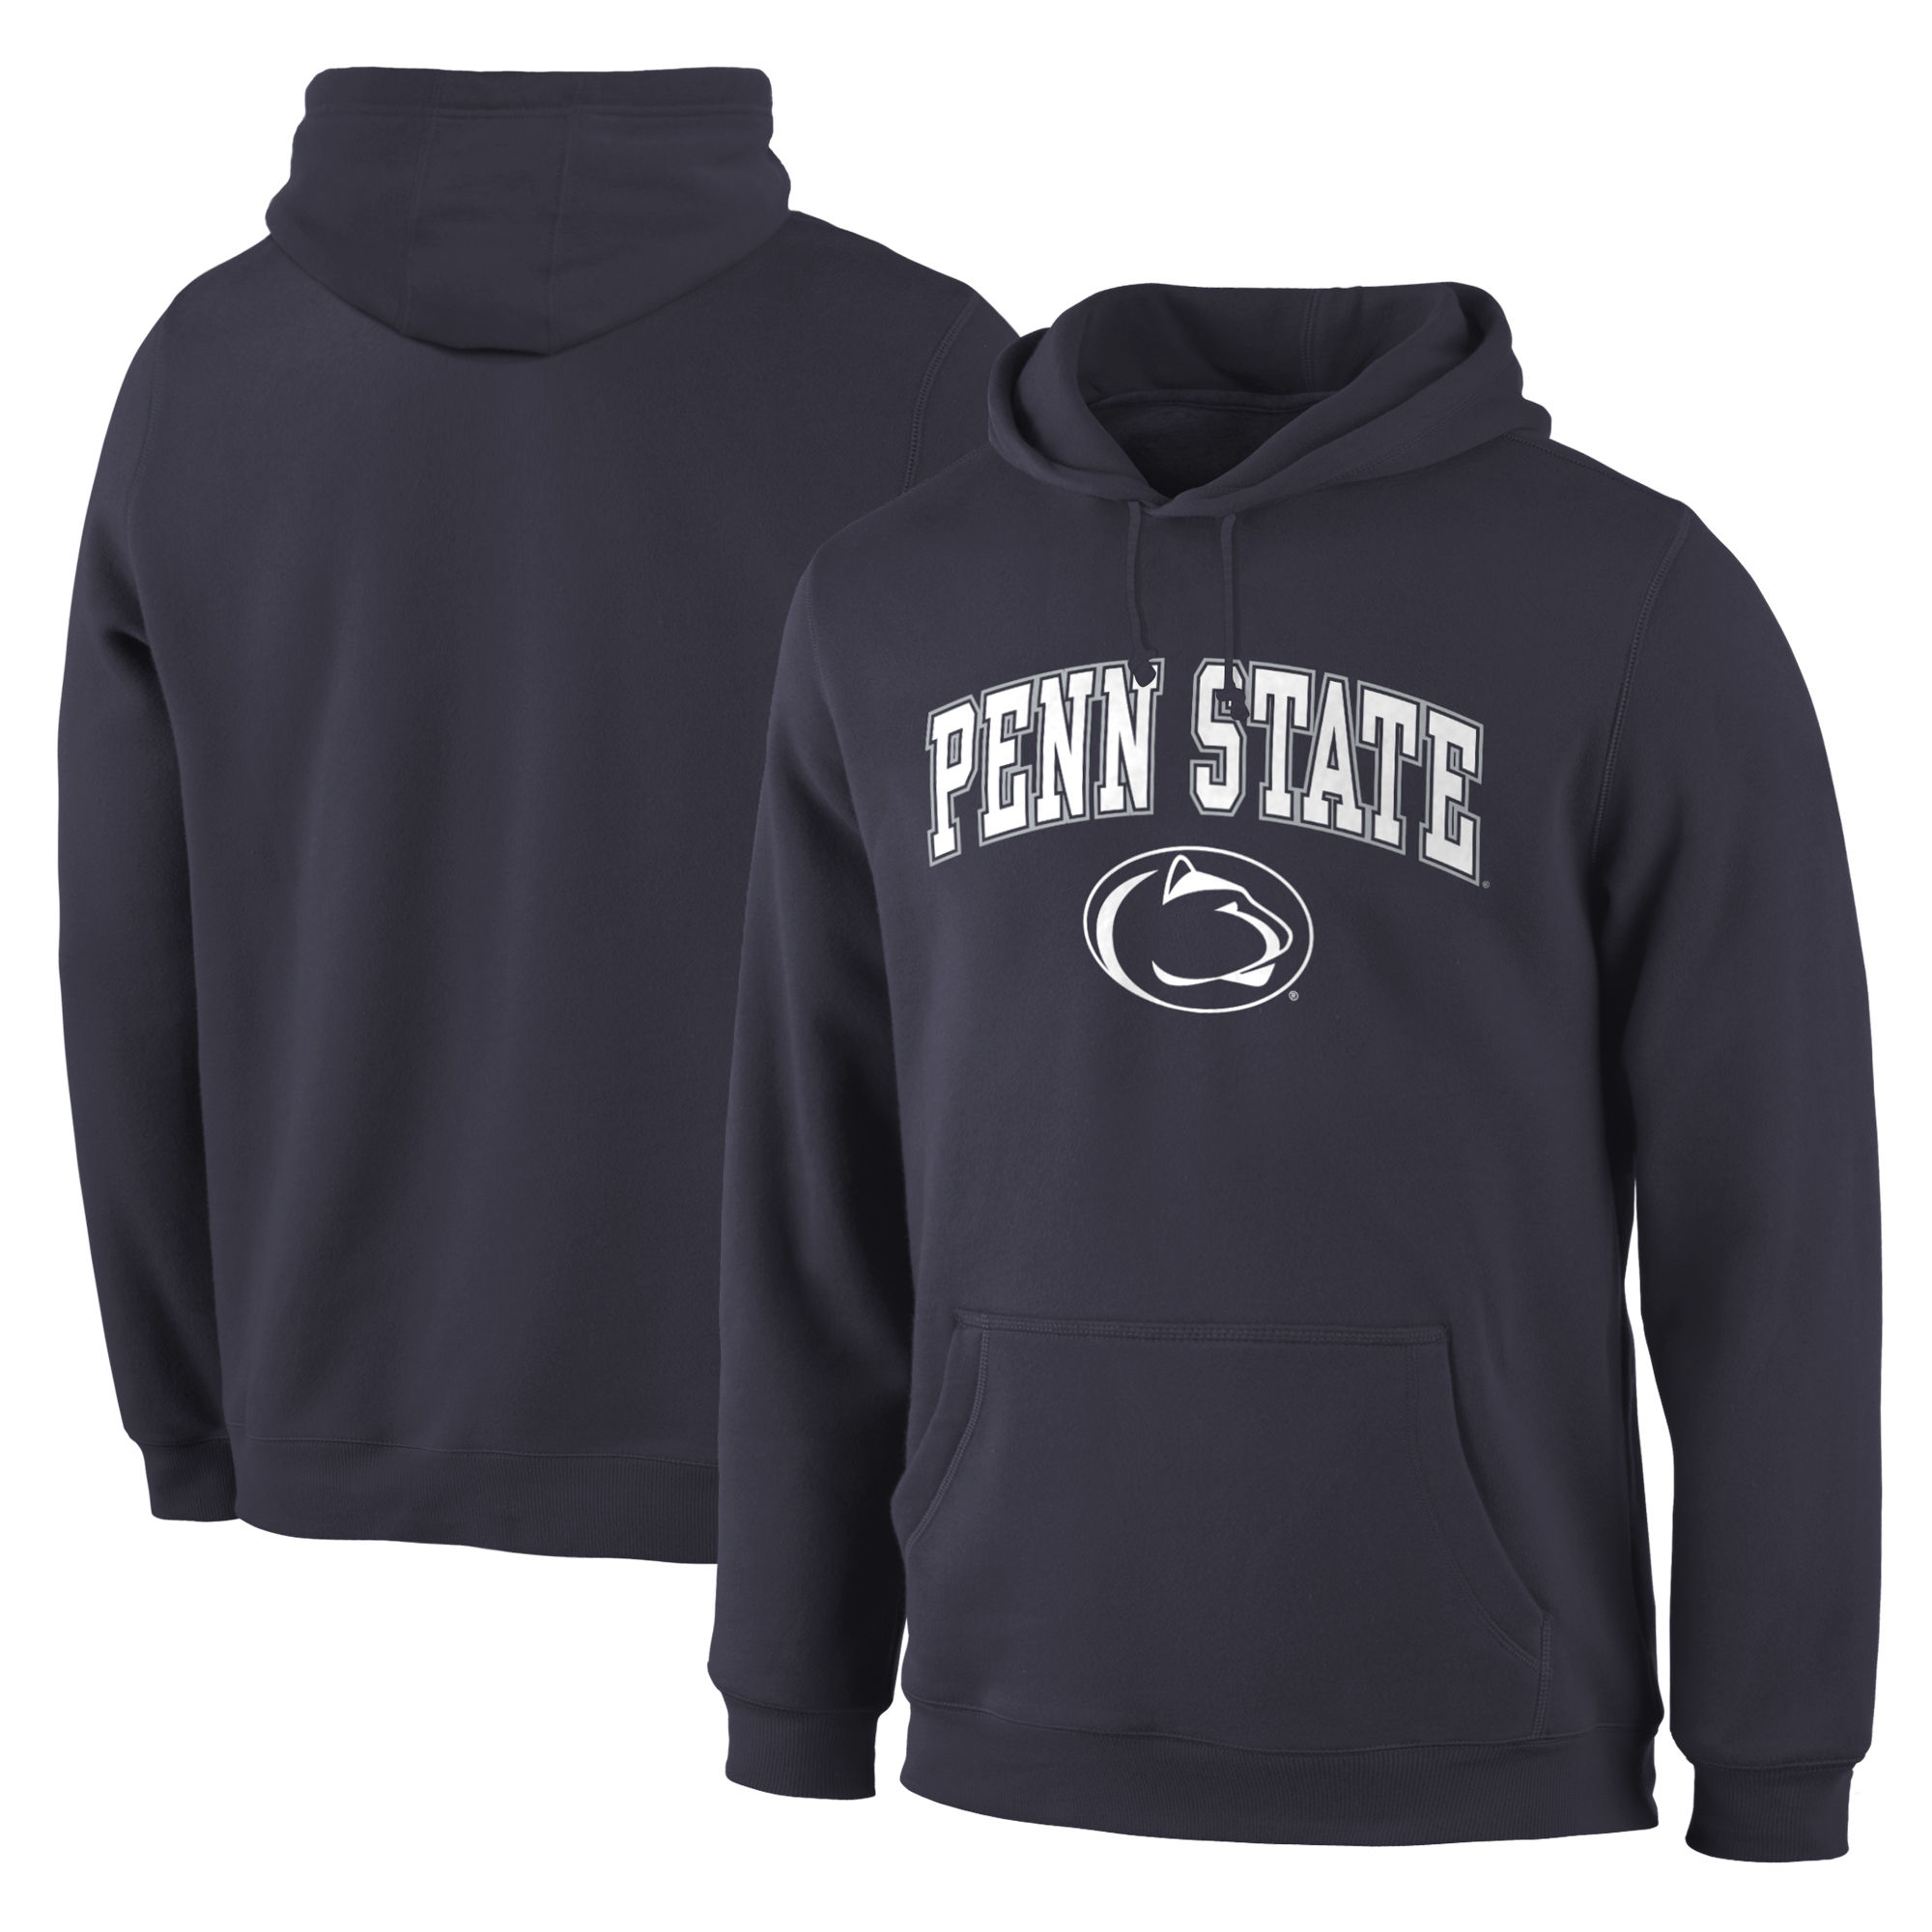 Penn State Nittany Lions Navy Campus Pullover Hoodie